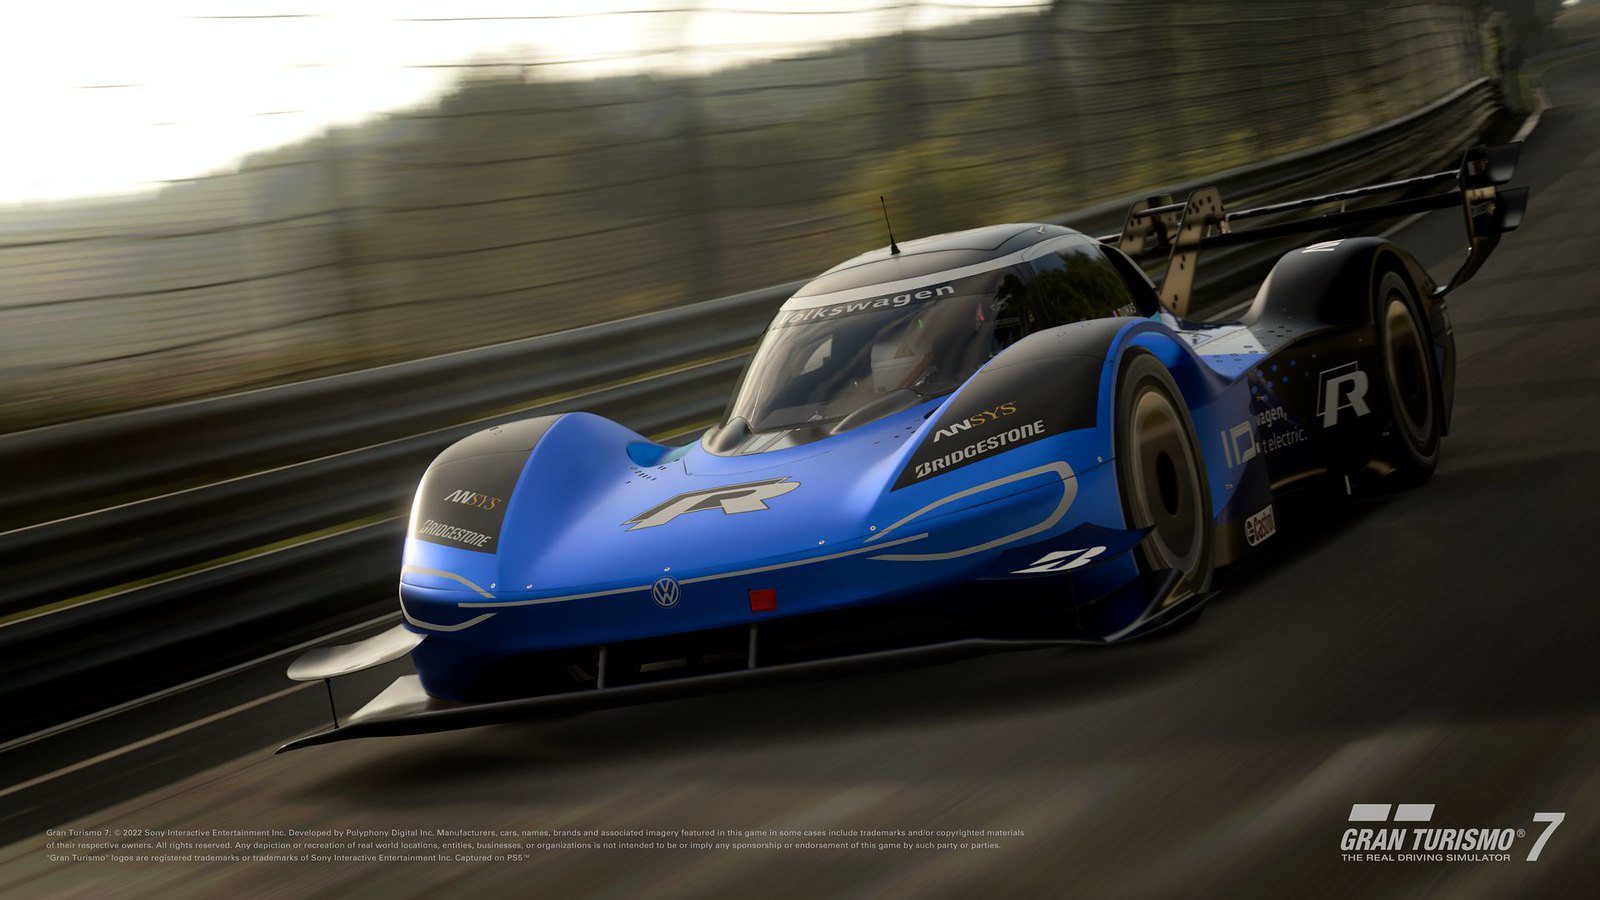 Gran Turismo 7 Update 1.23 adds three new cars and two new scapes